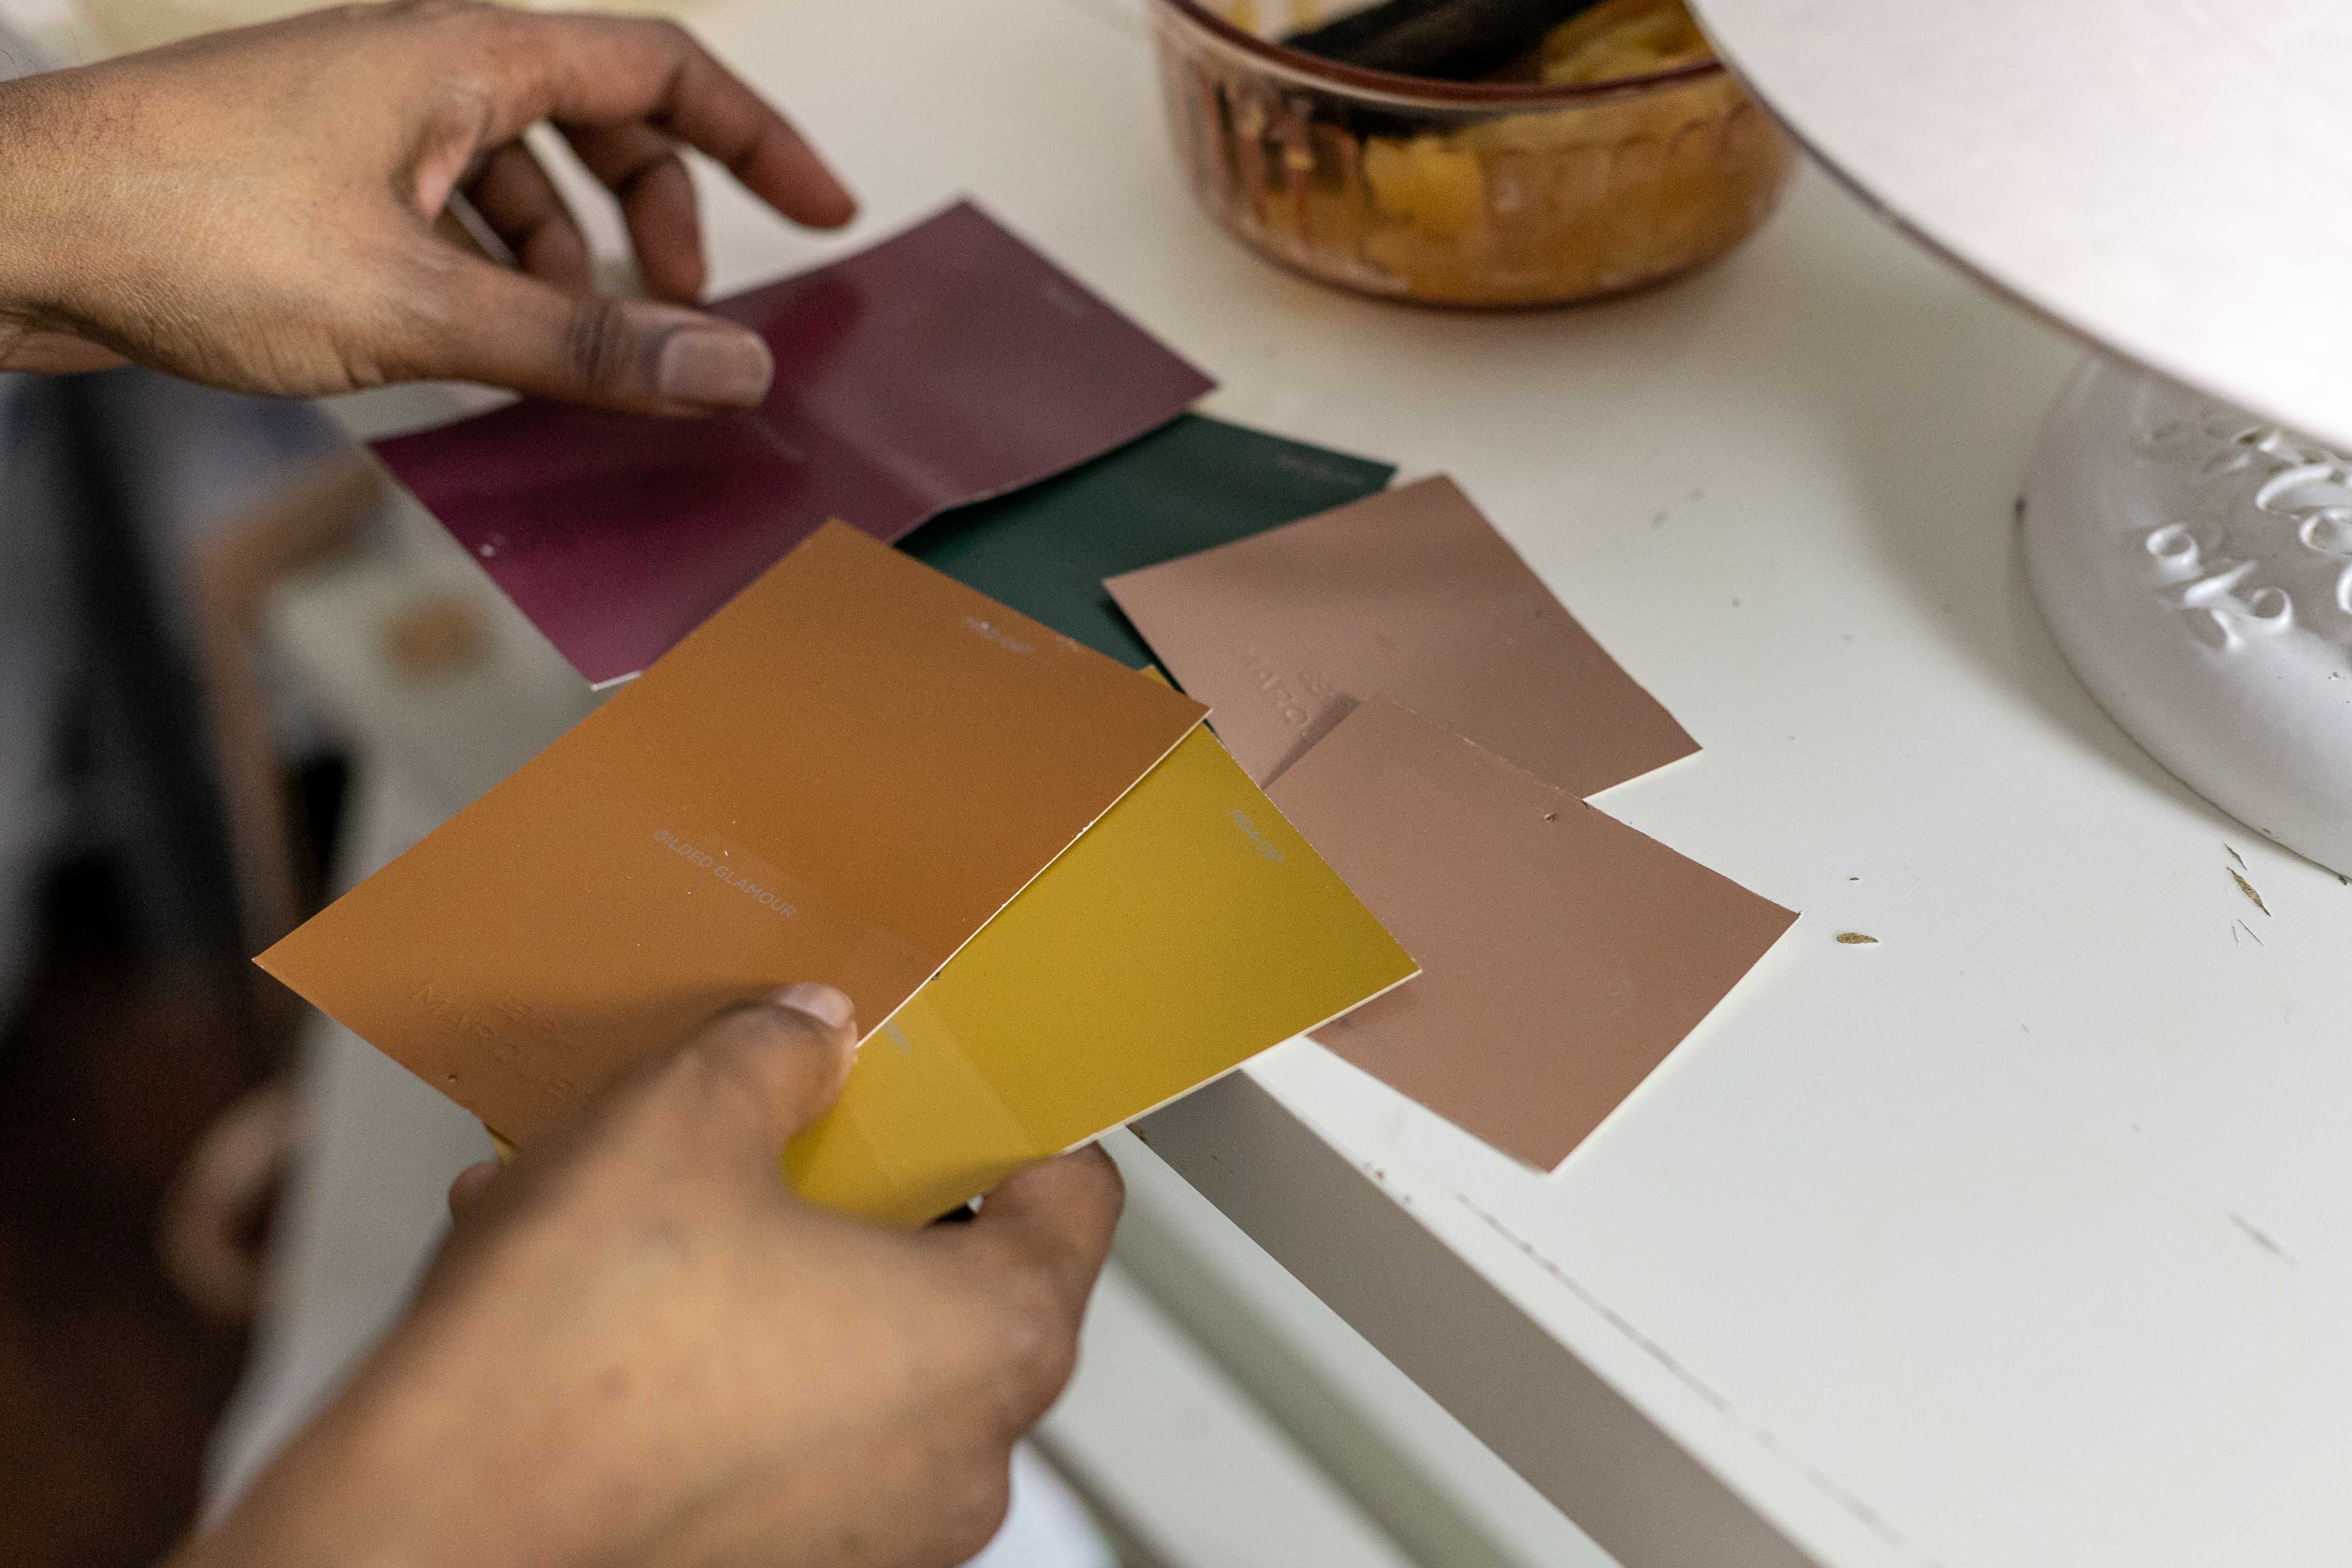 Selecting color swatches from paint store